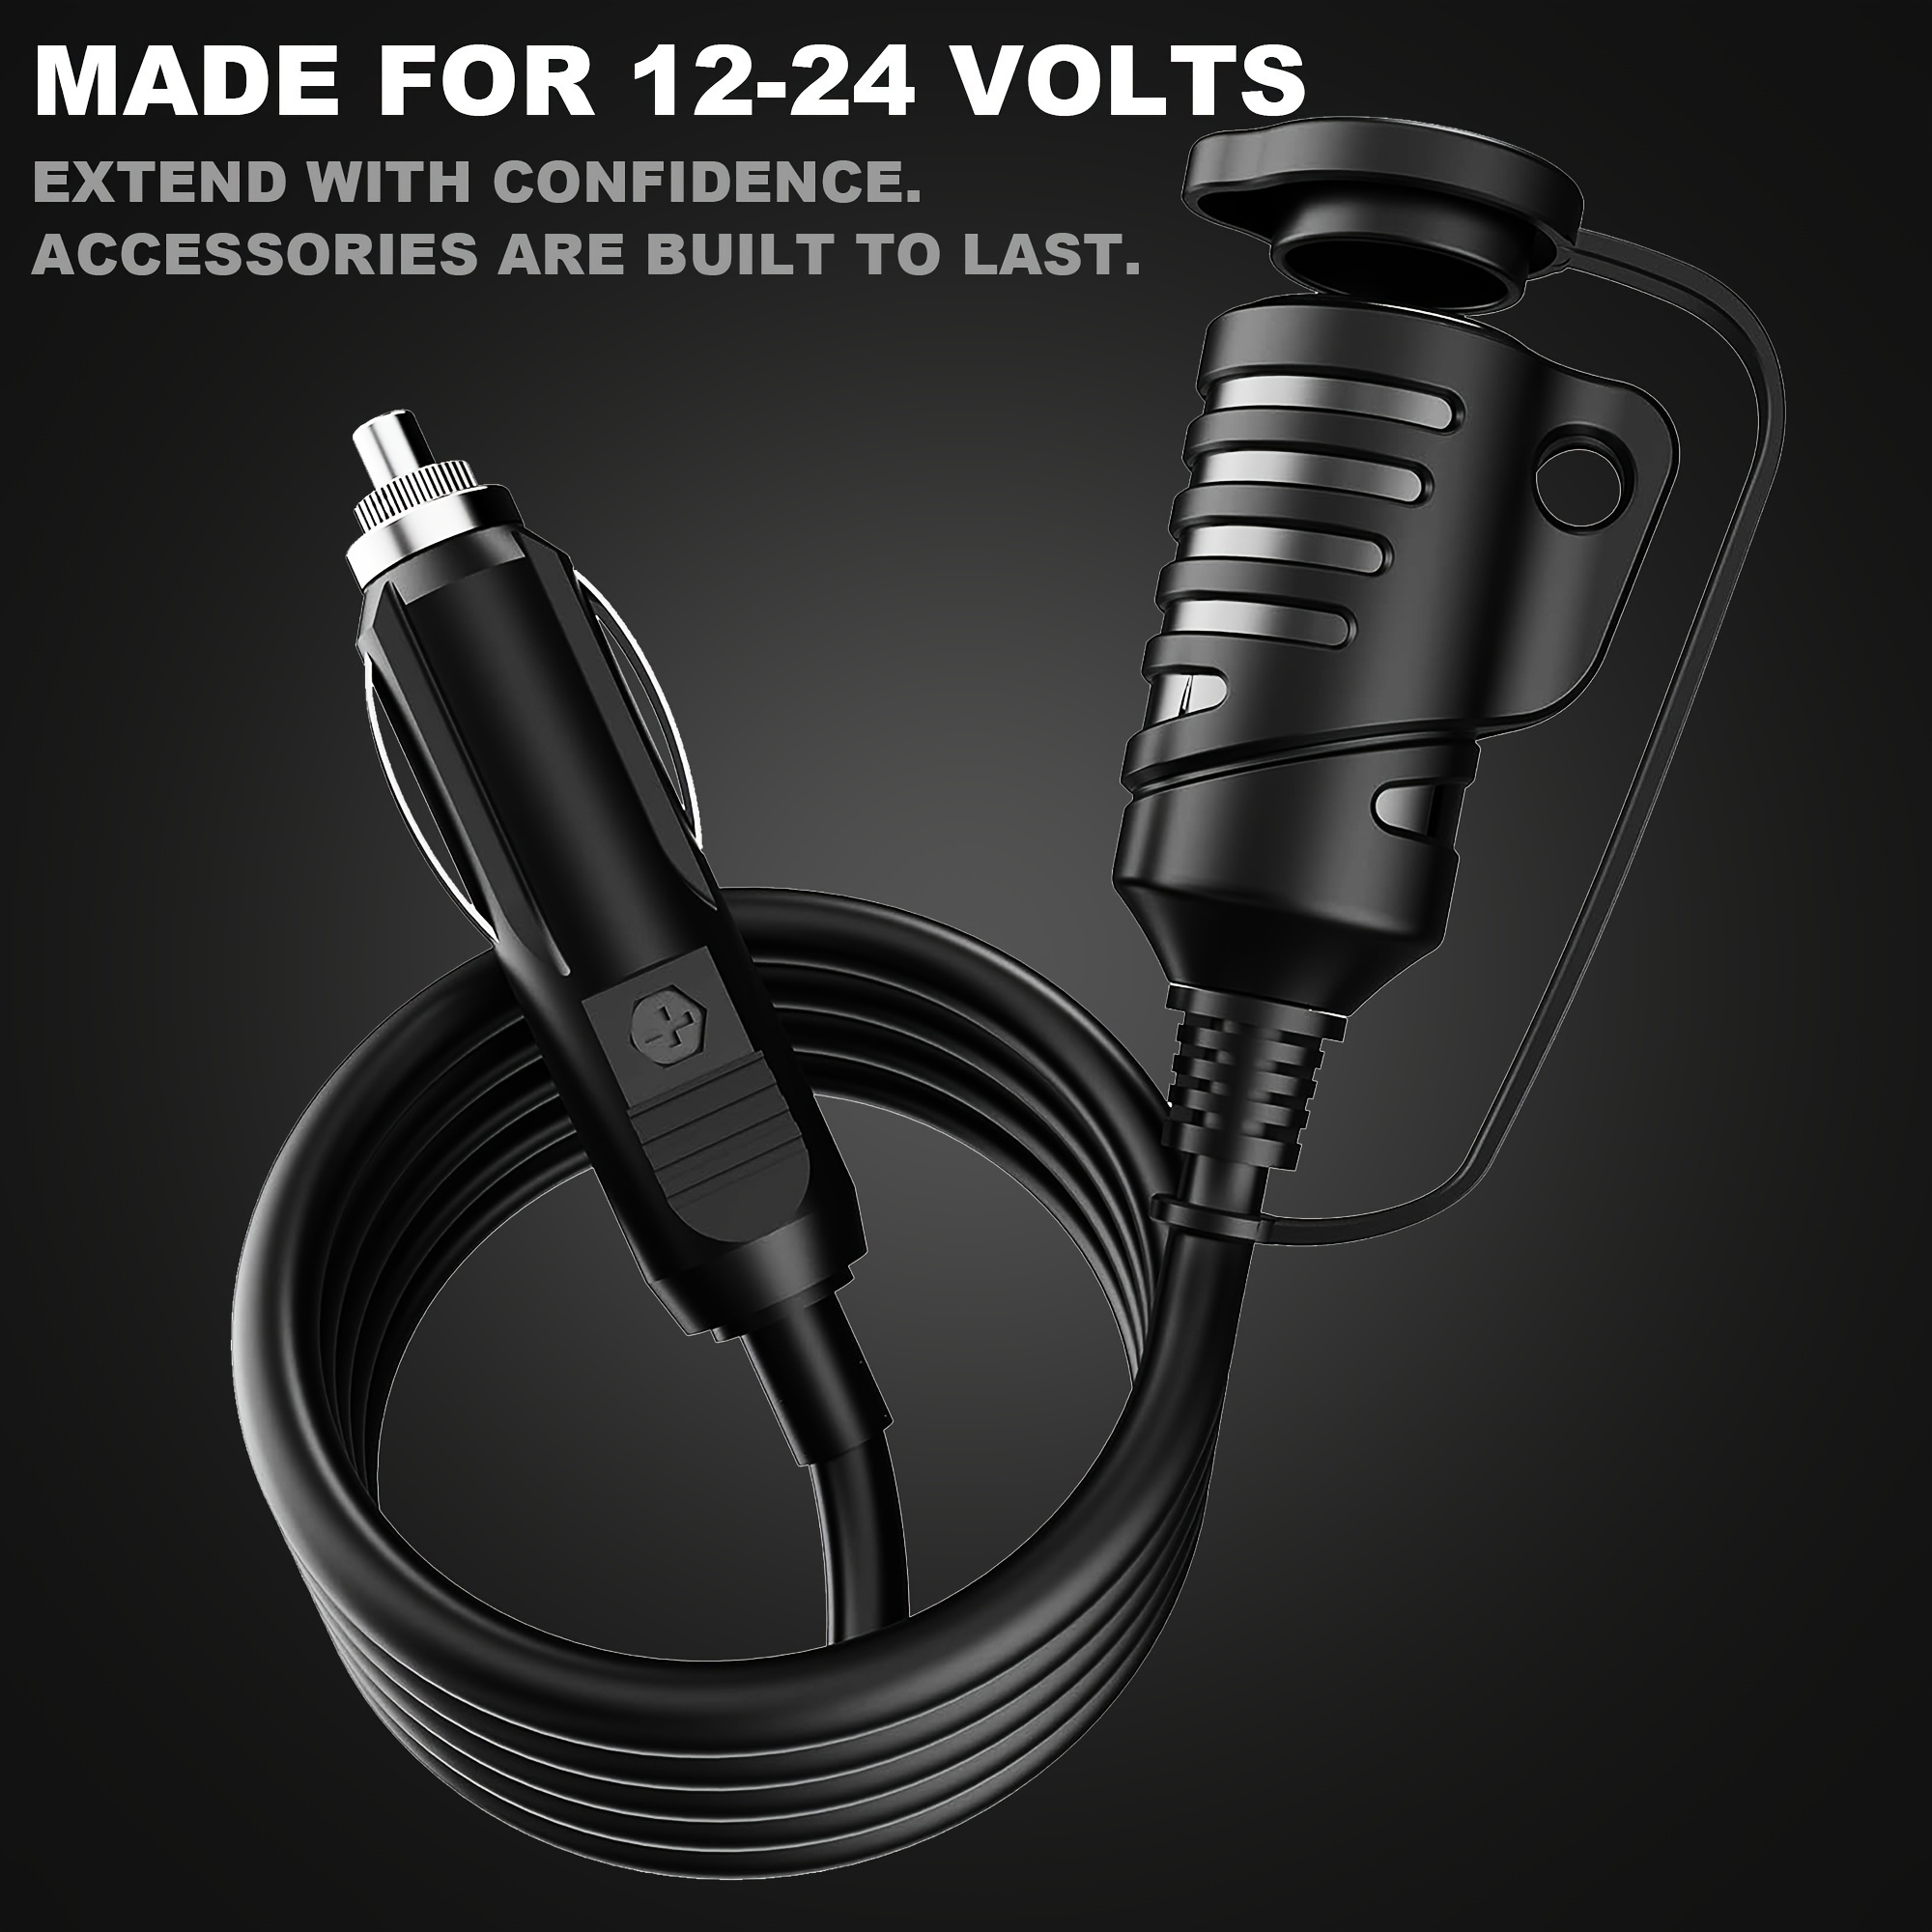 12V Wire Adapter Plug Socket Lead Connector Accessory Cord Car Cigarette  Lighter 3m Extension Cable Black